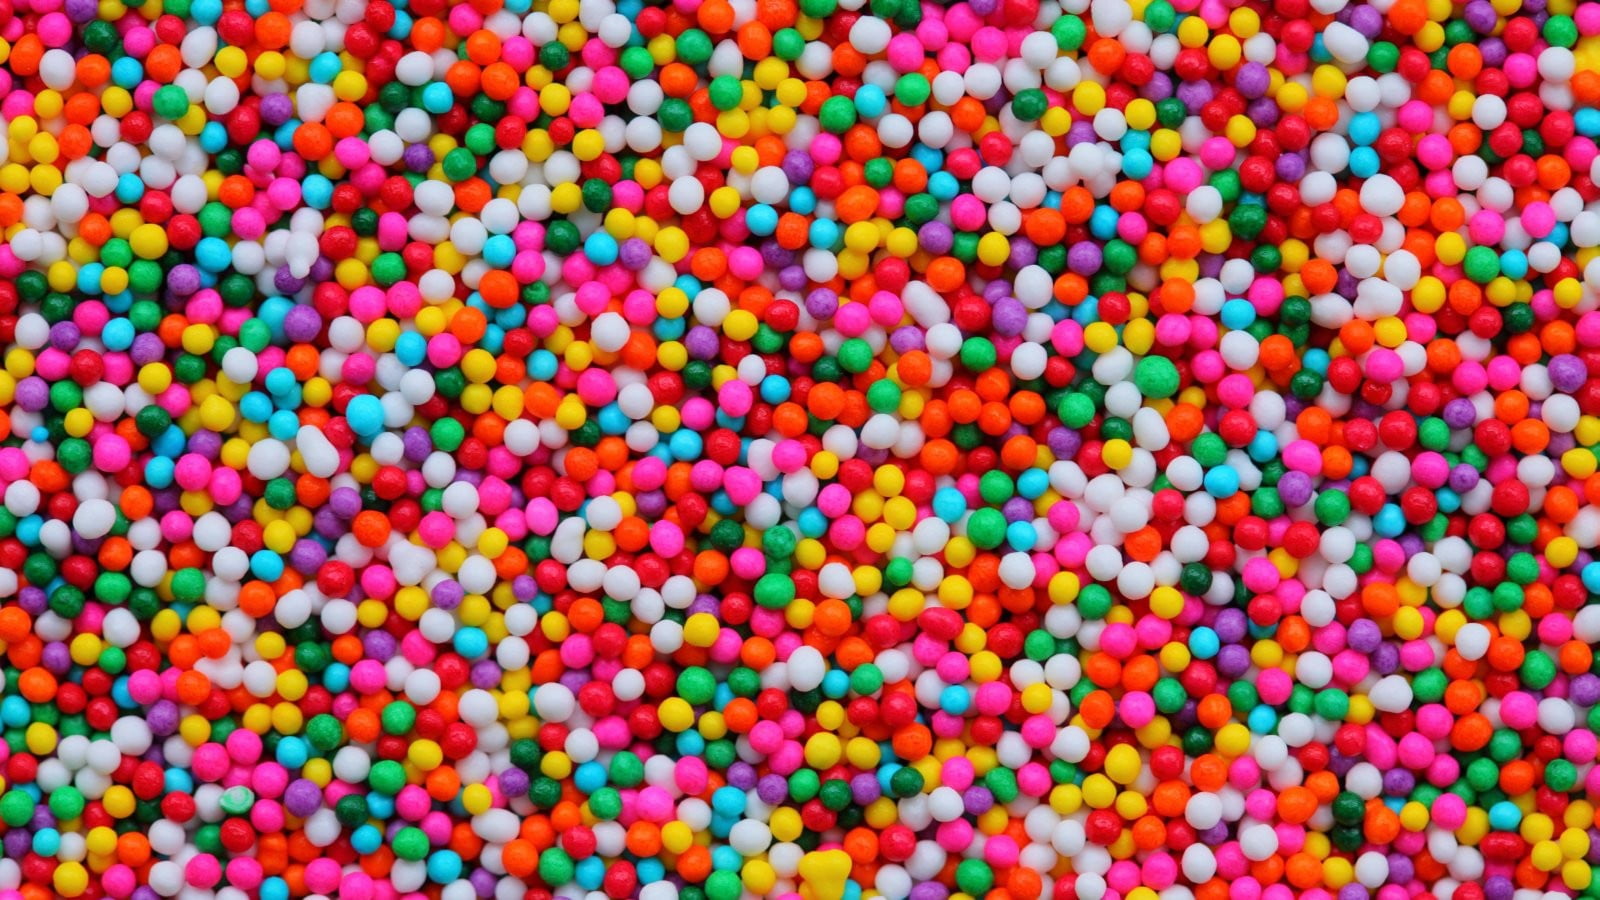 assorted-color ball lot, colorful, candies